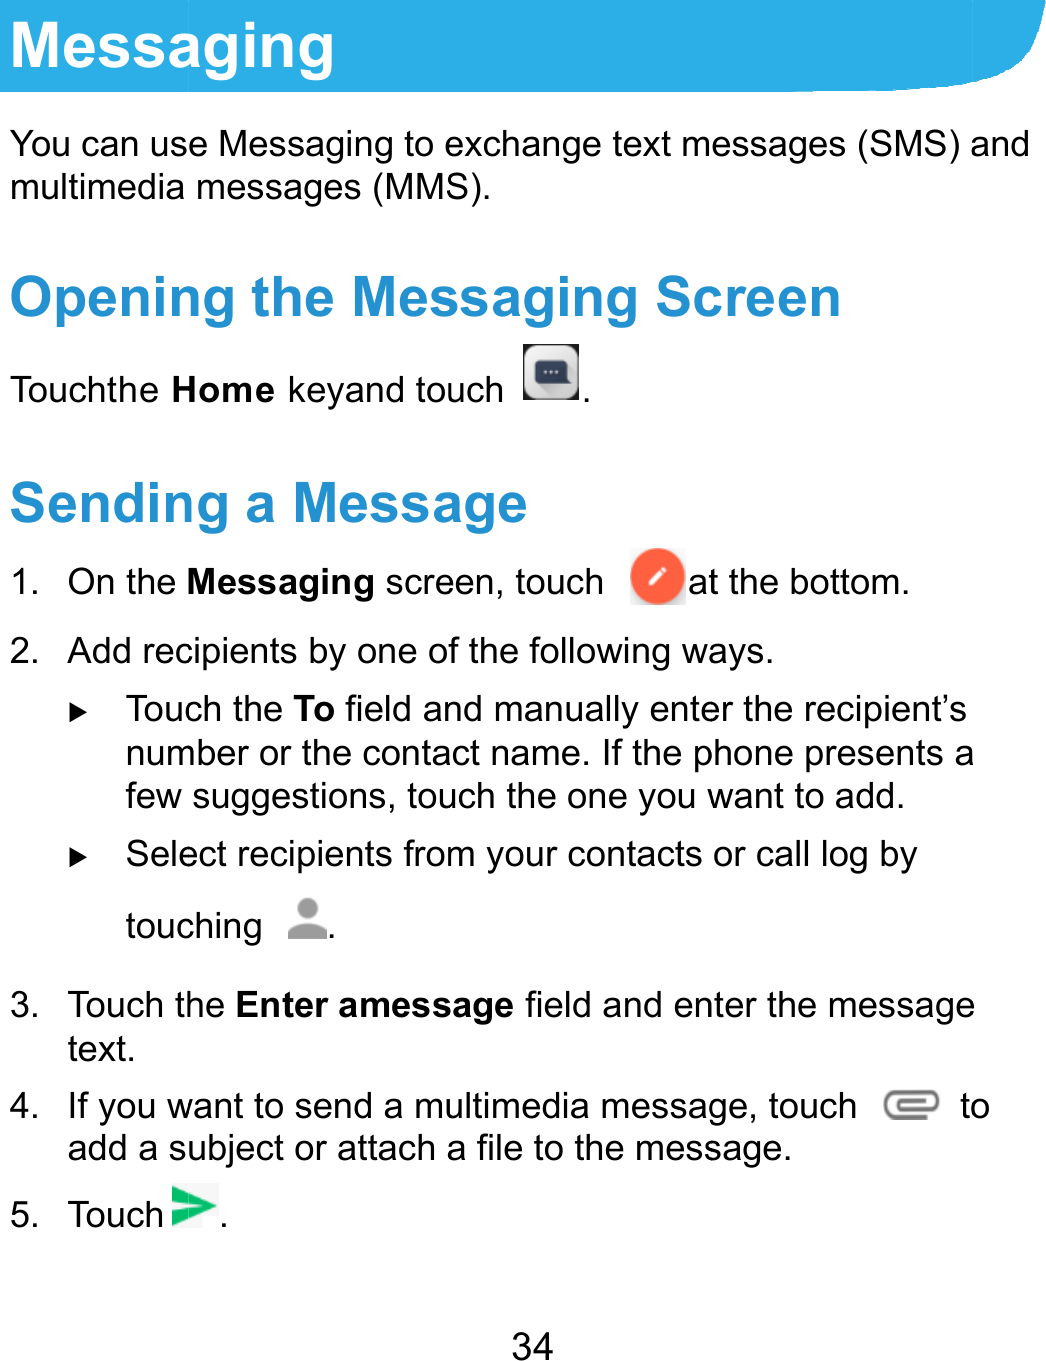  MessaYou can usmultimedia OpeninTouchthe HSendin1. On the 2. Add rec To ucnumfew  Seletouc3. Touch thtext. 4. If you wadd a s5. Touch aging e Messaging to emessages (MMSng the MesHome keyand toung a MessaMessaging screcipients by one ofch the To field anmber or the contasuggestions, touect recipients fromching . he Enter amesswant to send a muubject or attach a. 34 exchange text mS). ssaging Scuch . age een, touch  atf the following wand manually enteact name. If the puch the one you wm your contacts sage field and enultimedia messaga file to the messessages (SMS) acreen t the bottom. ays. er the recipient’s phone presents awant to add. or call log by nter the messagege, touch    tosage. and a e o 